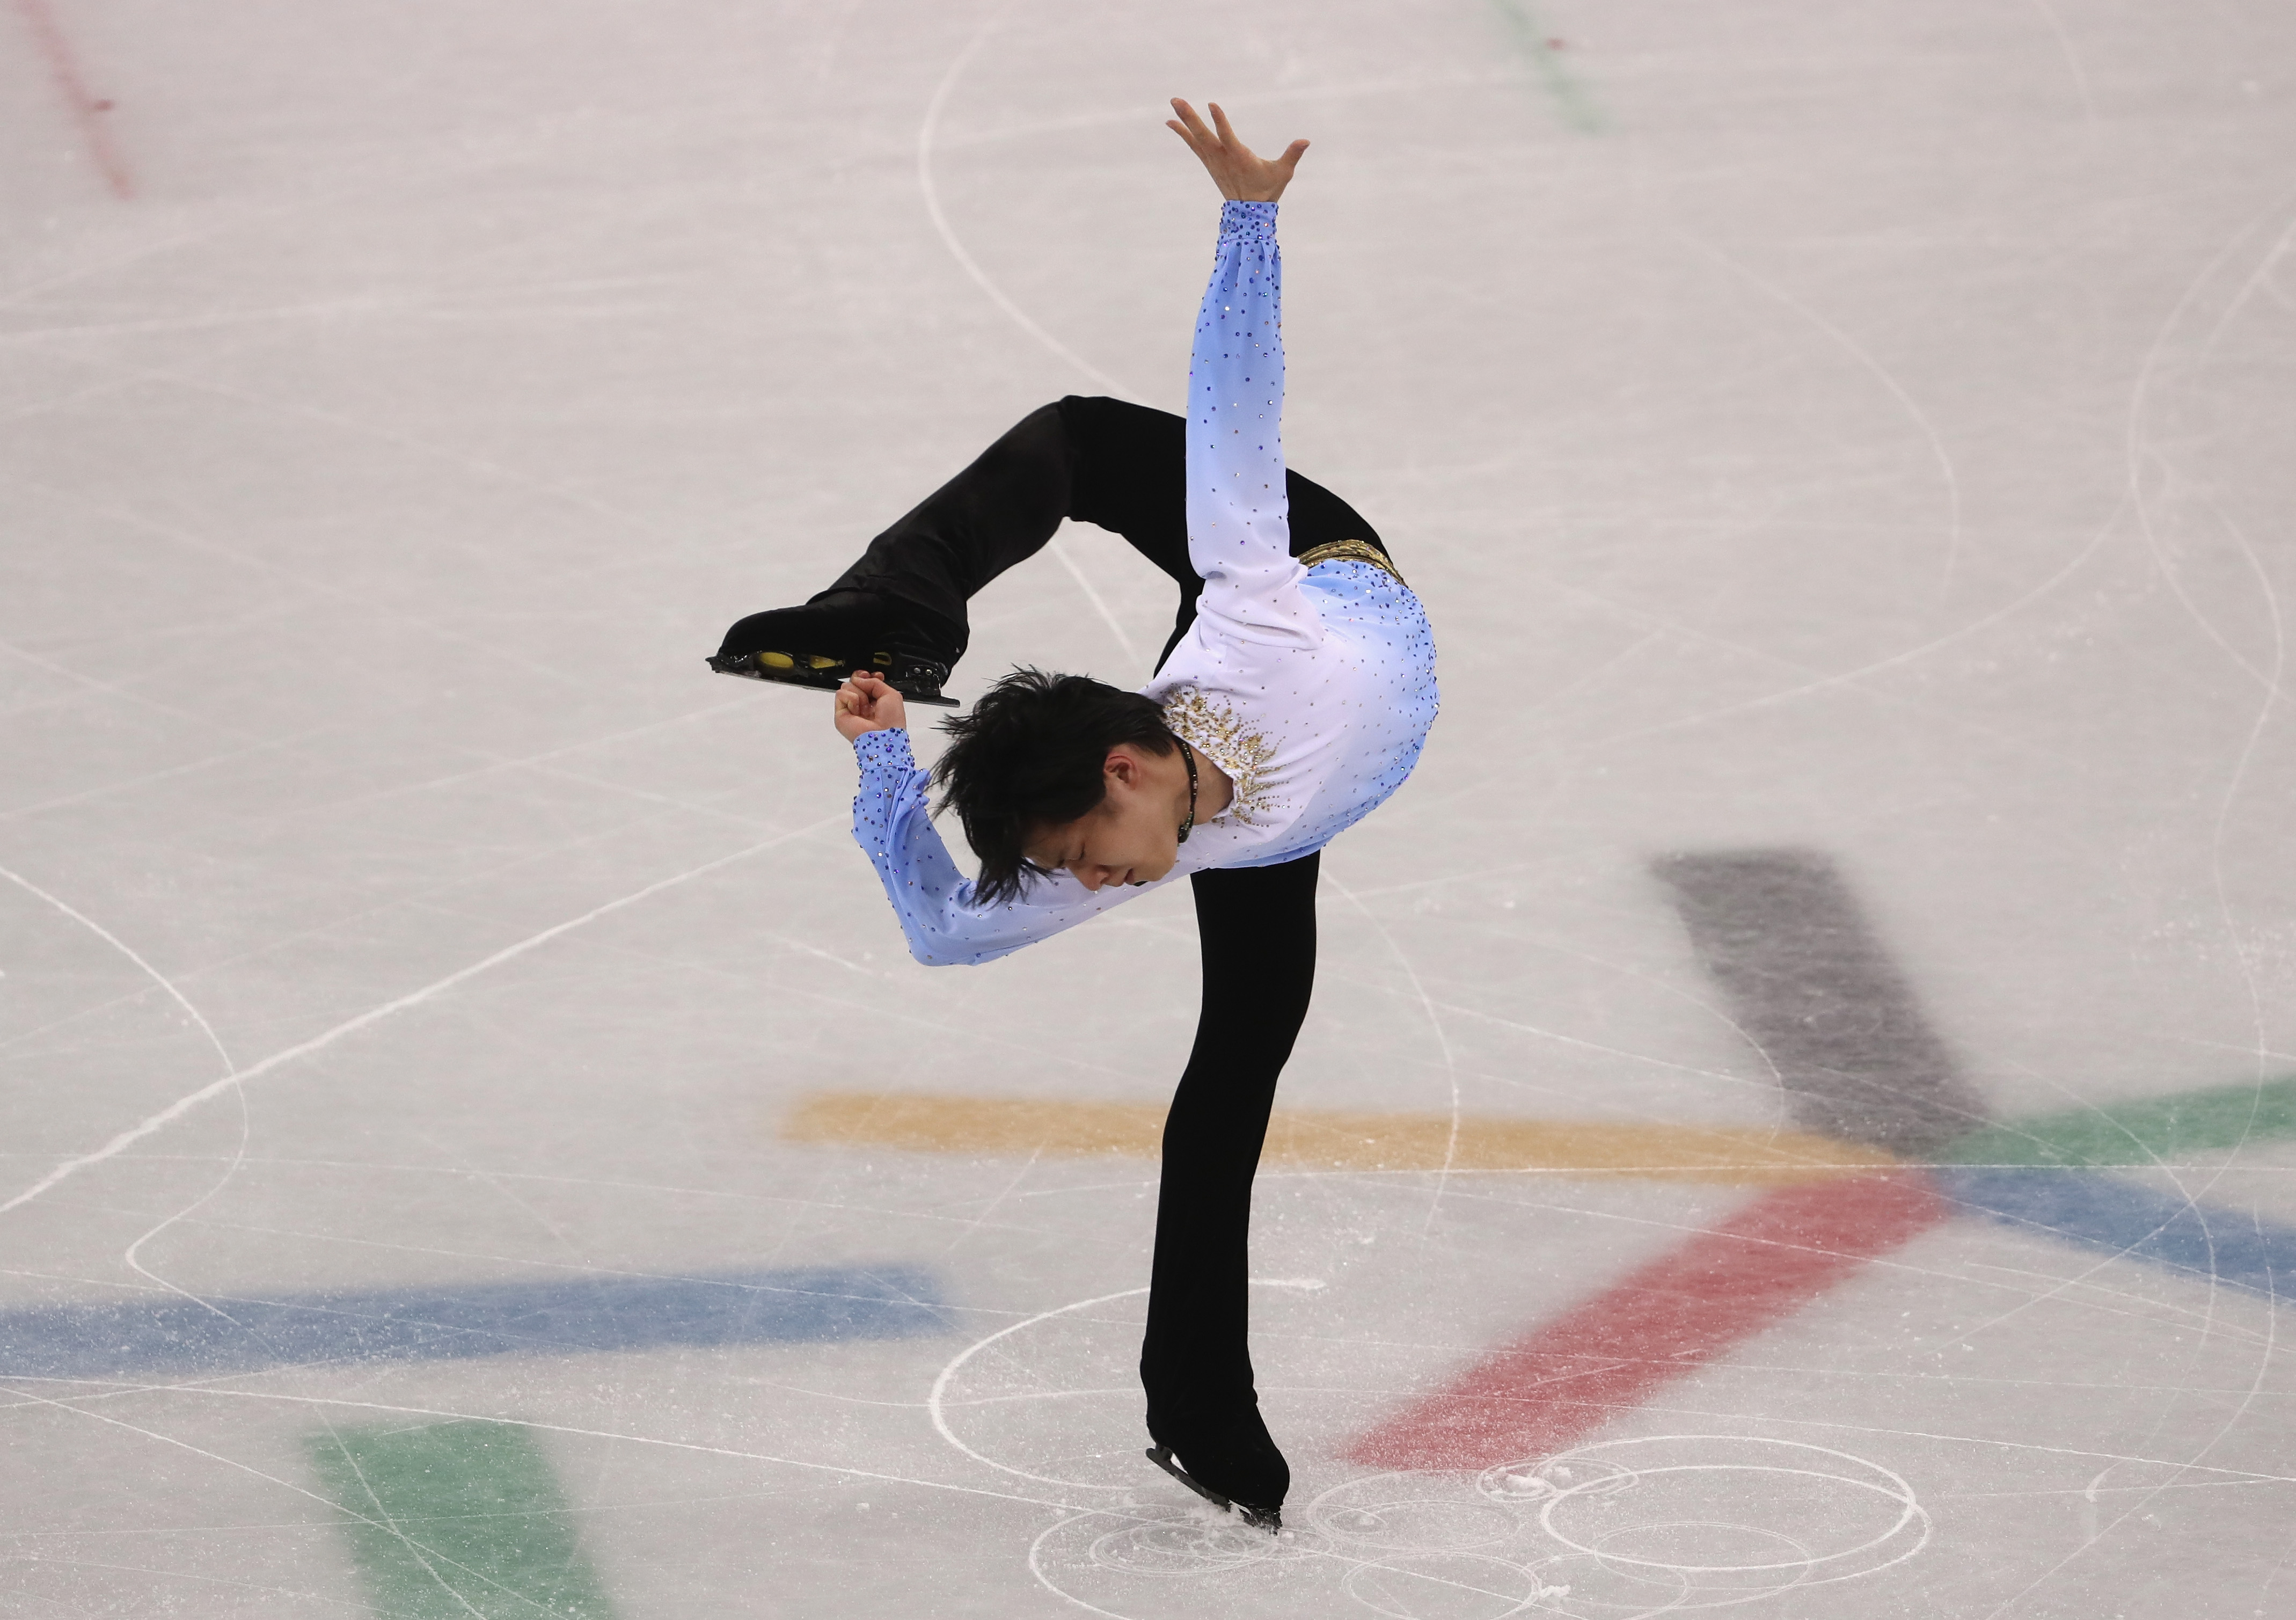 Yuzuru Hanyu: What to Know About the Olympics Figure Skater | Time